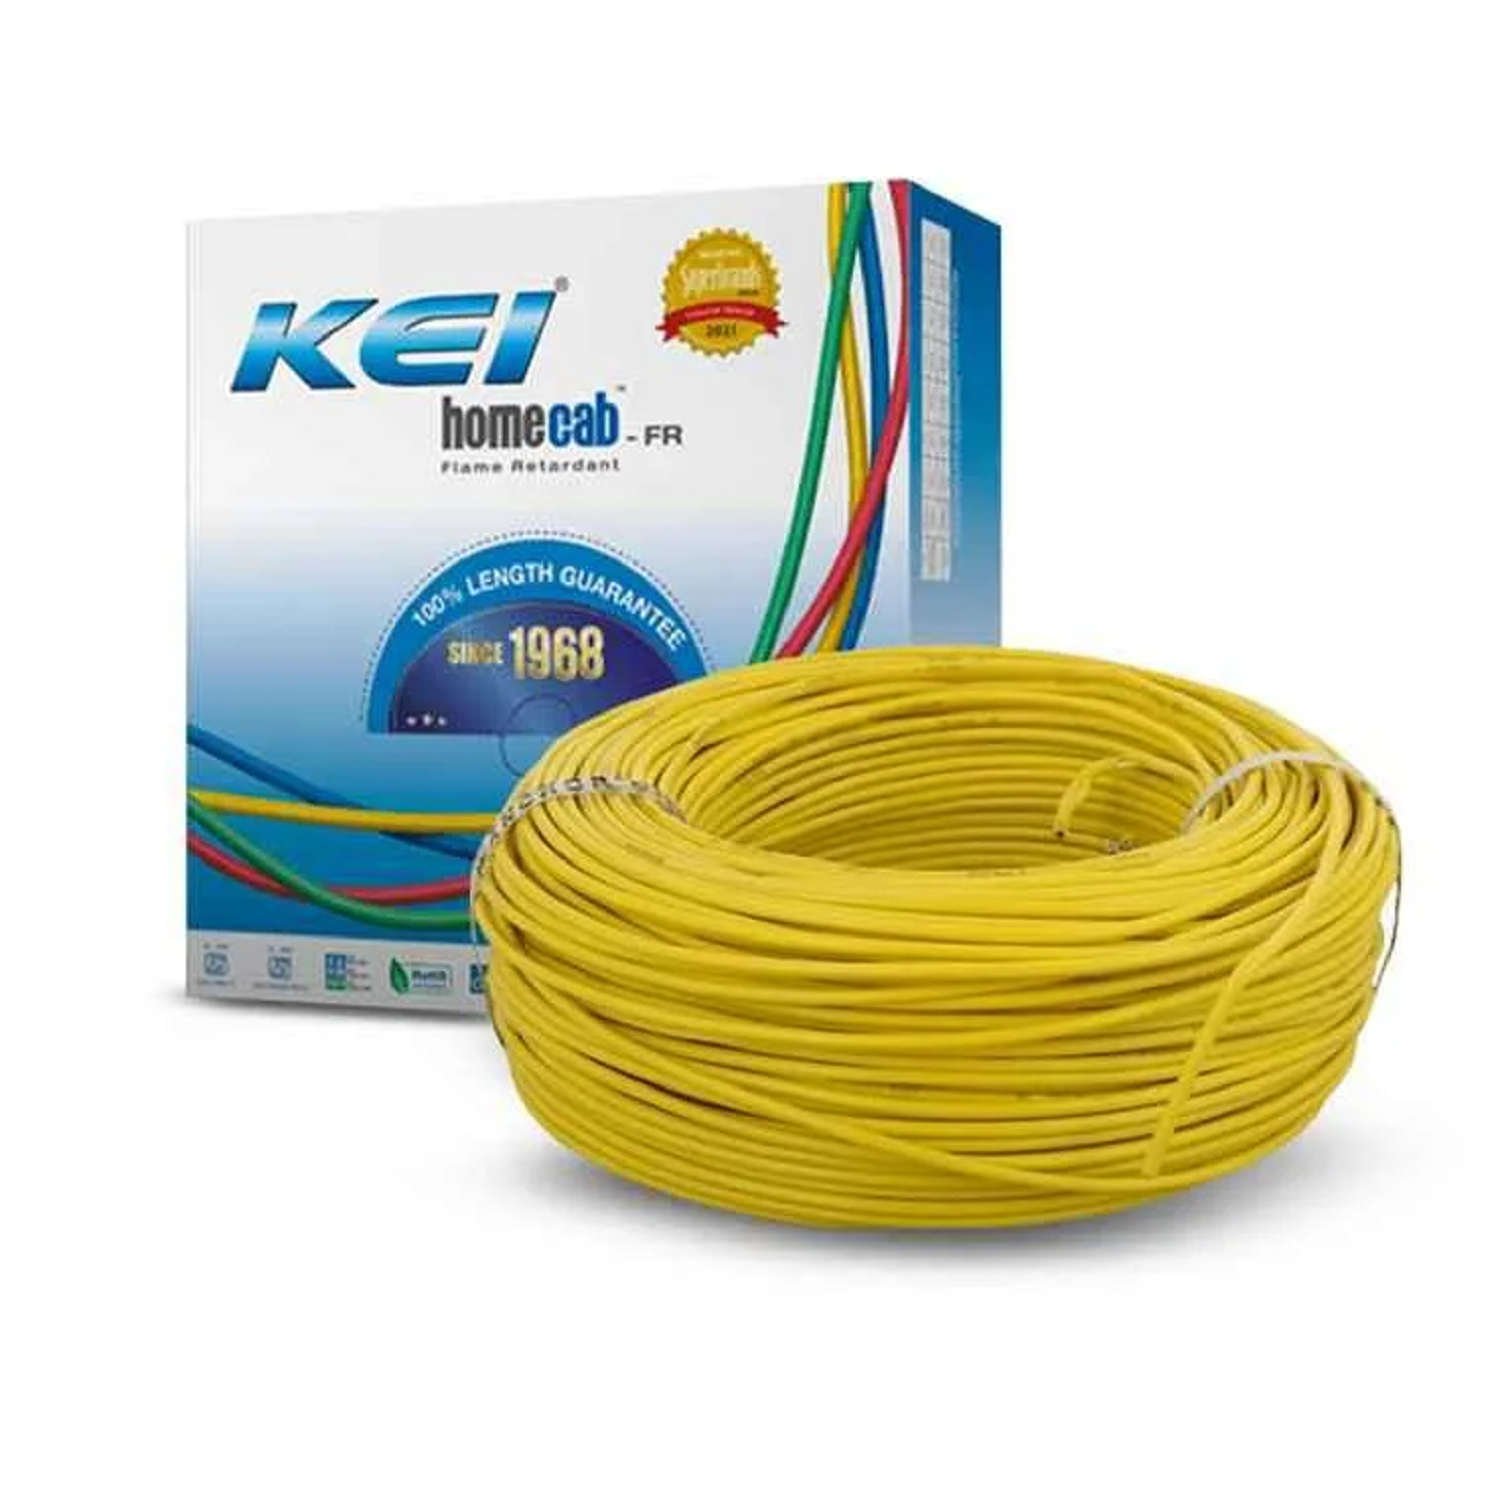 1.0 Sqmm KEI FR Single Core Copper Wire 90 MTR PVC Insulated for House 38 Industrial use (Yellow)